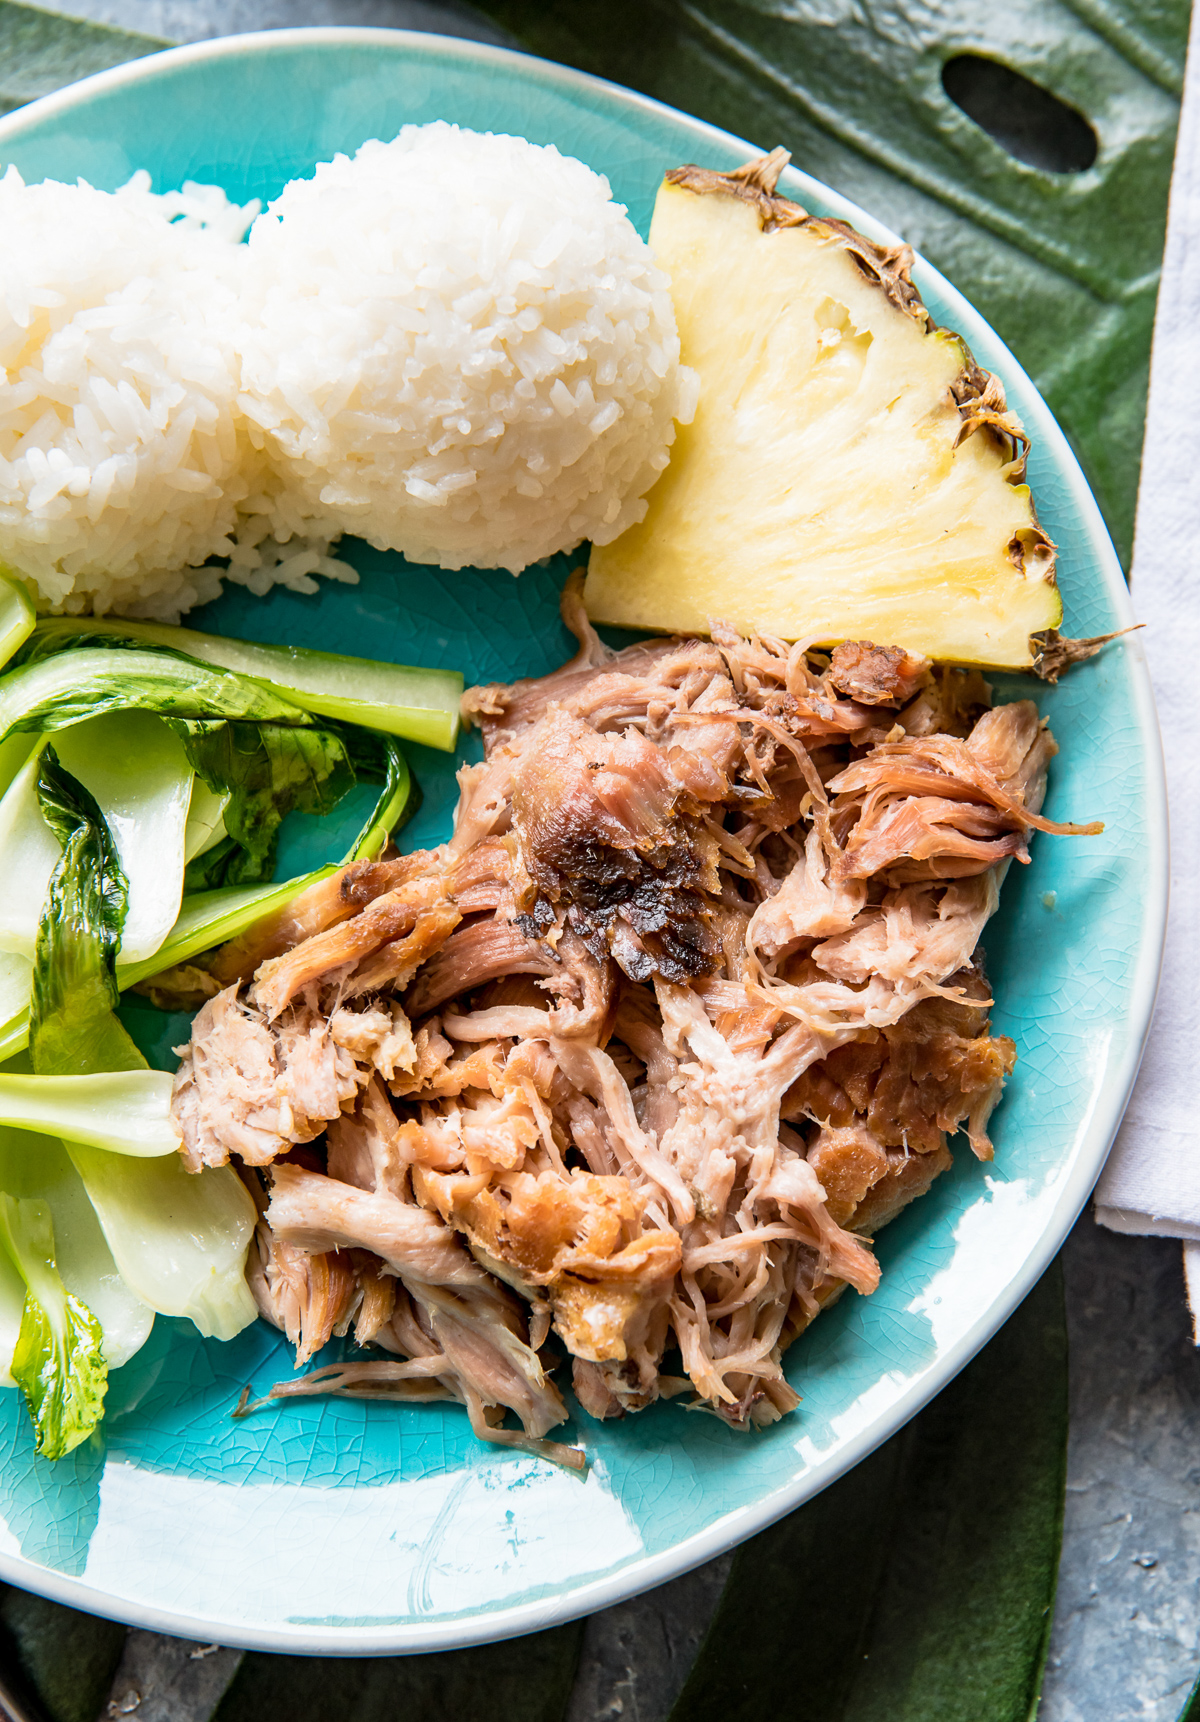 kālua pork on a blue plate with baby bok choy pineapple wedge scoops of white rice